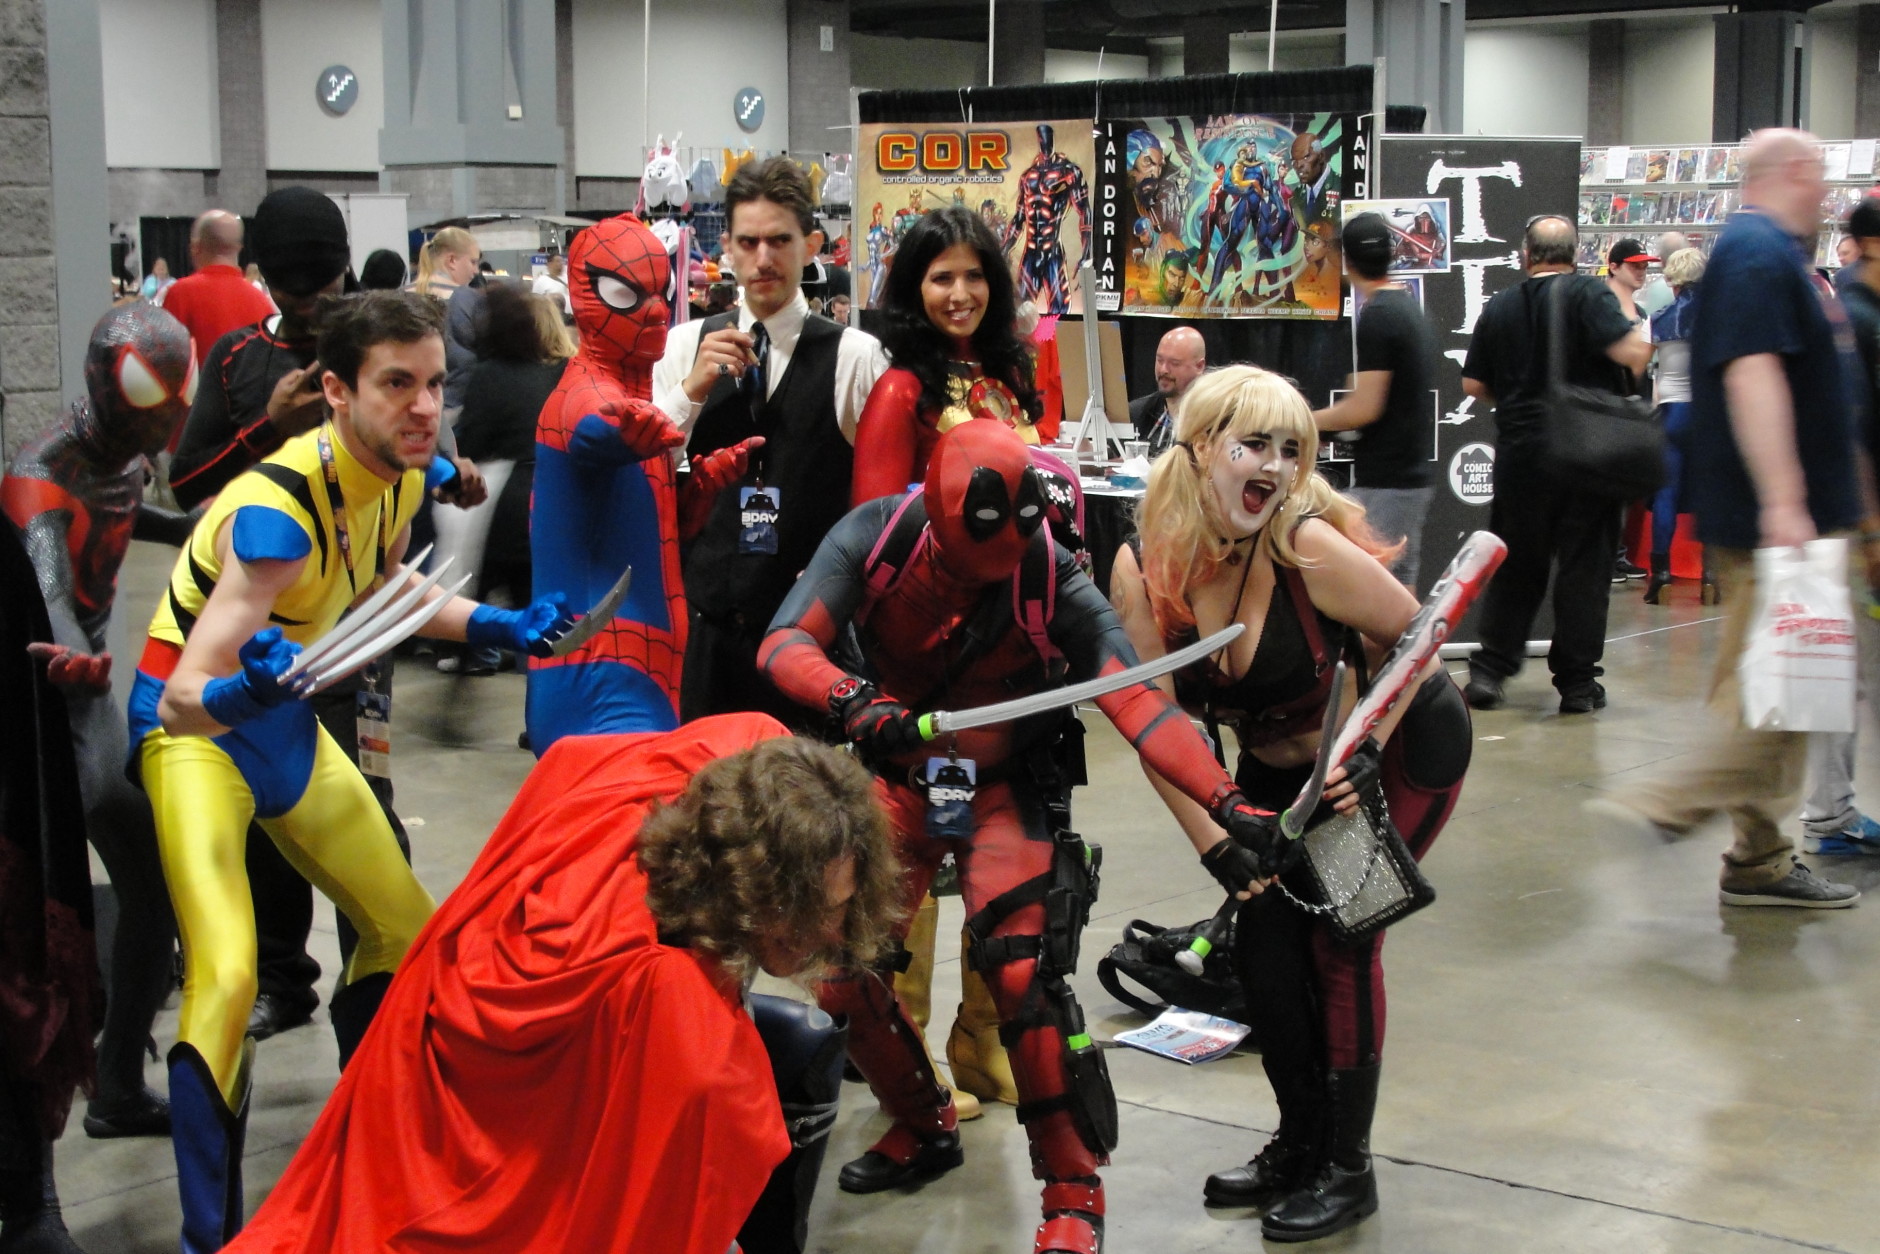 Several characters at Awesome Con on Friday, June 3, 2016. (WTOP/Steve Winter)